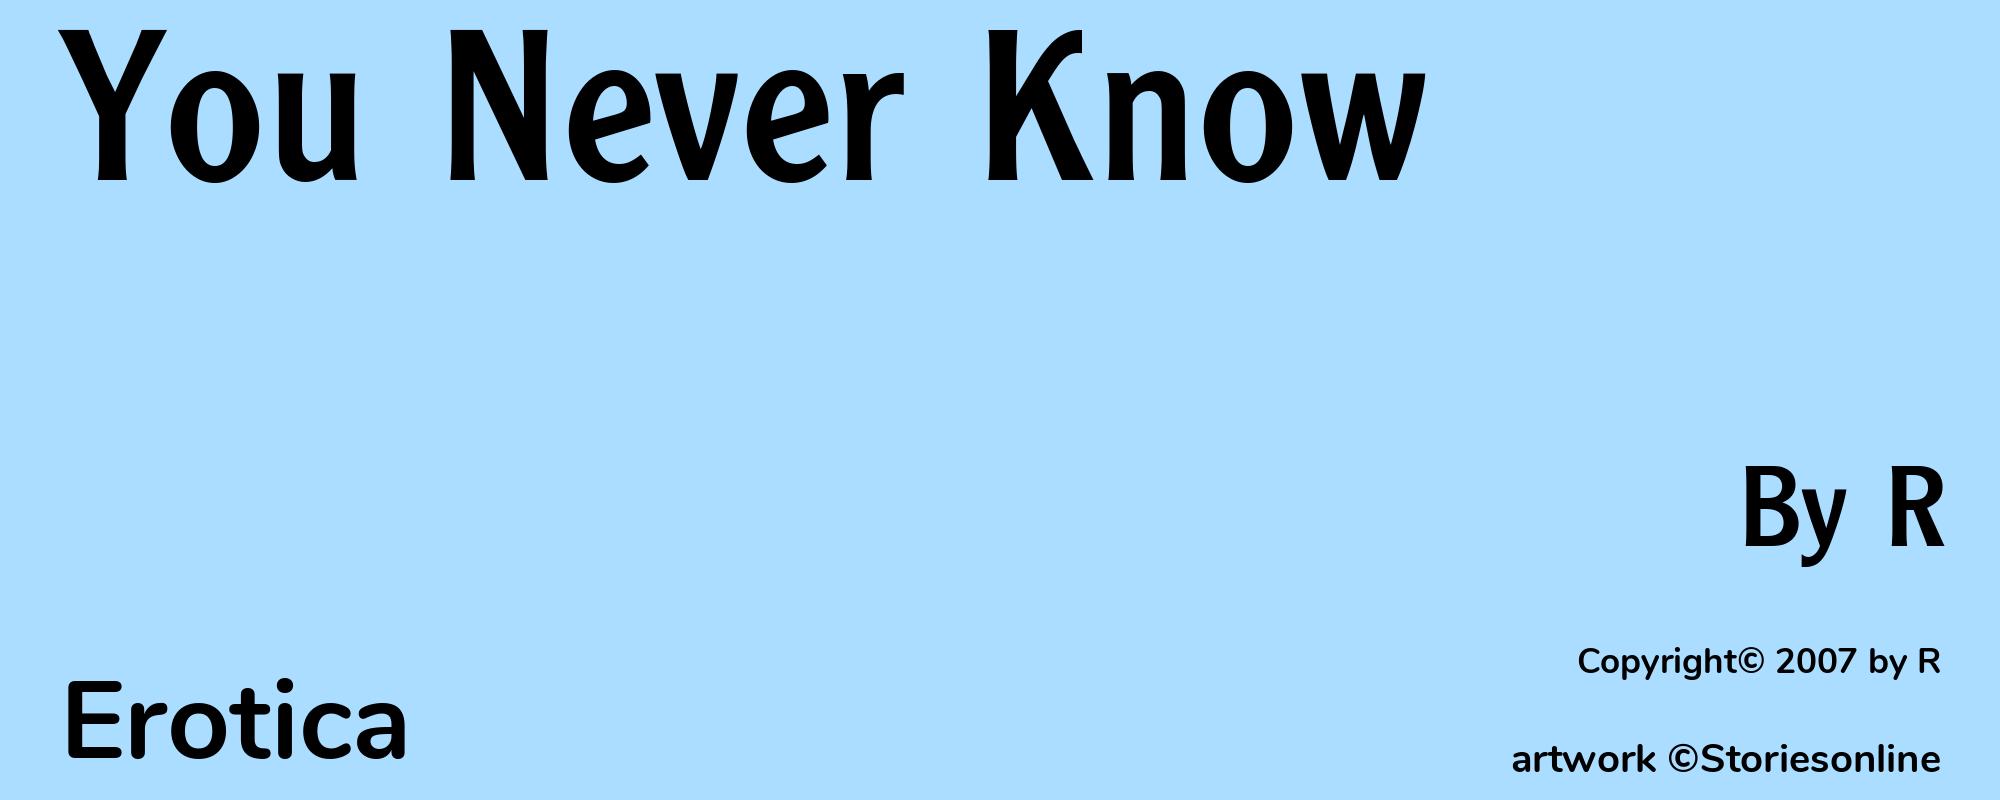 You Never Know - Cover